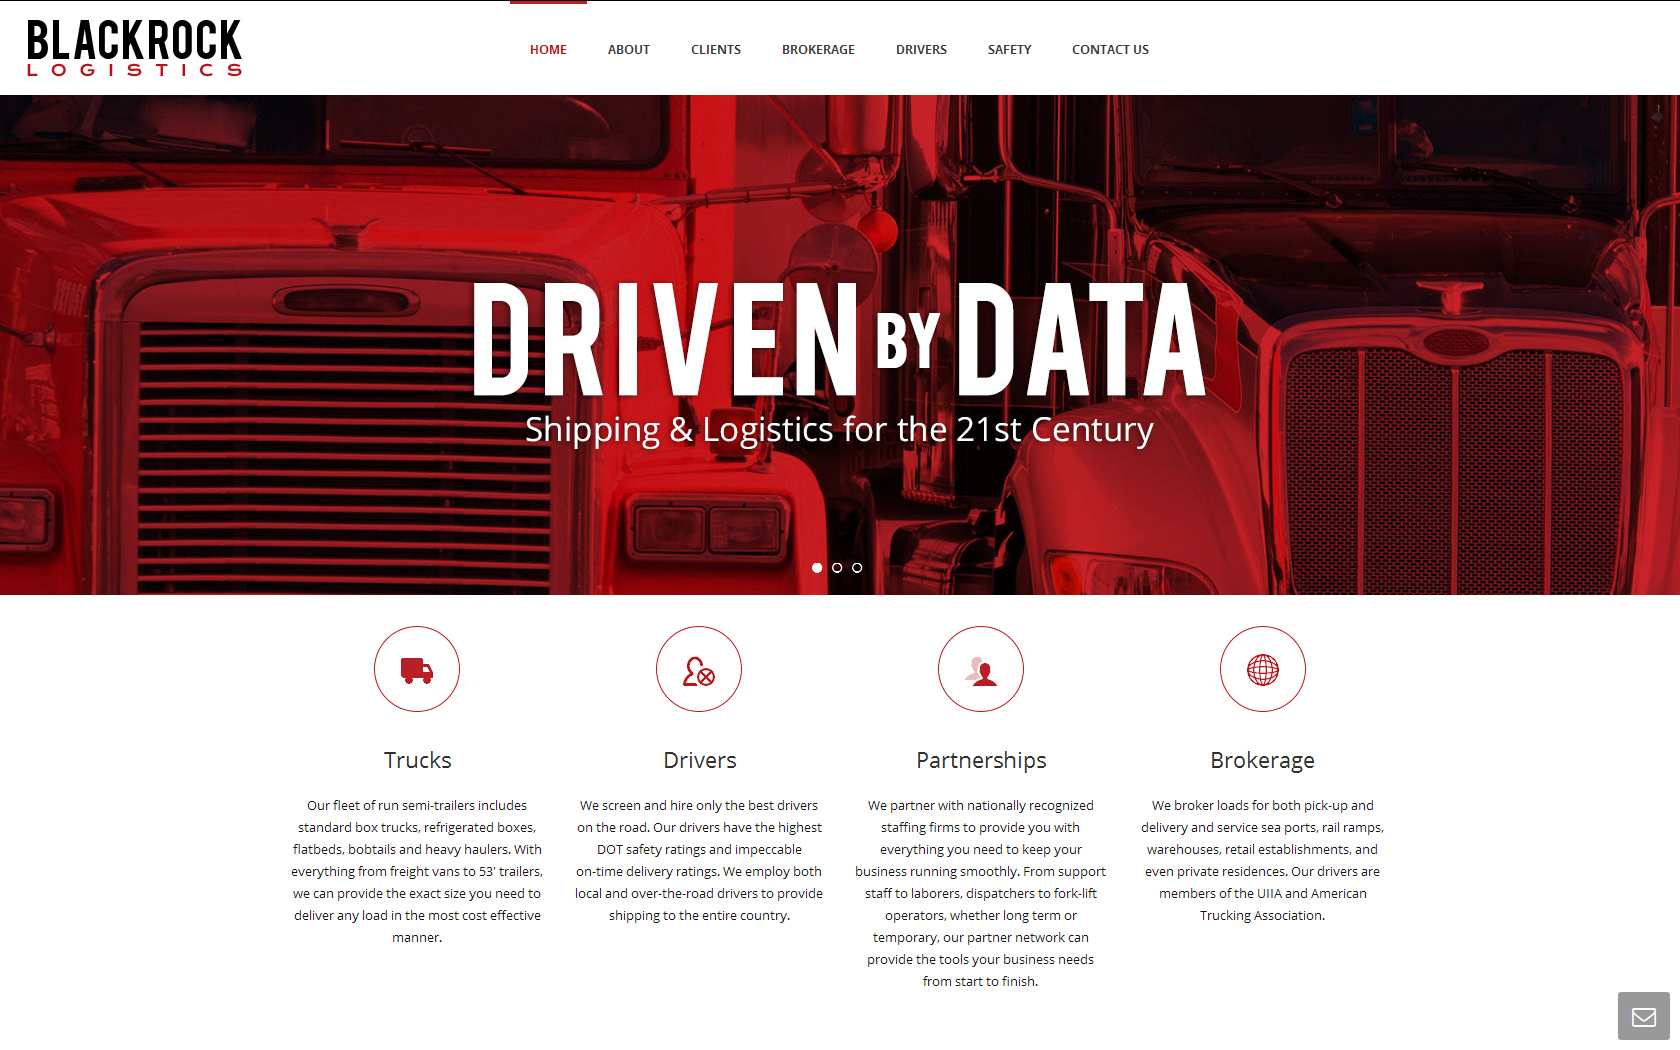 web design example industry logistics freight company websites